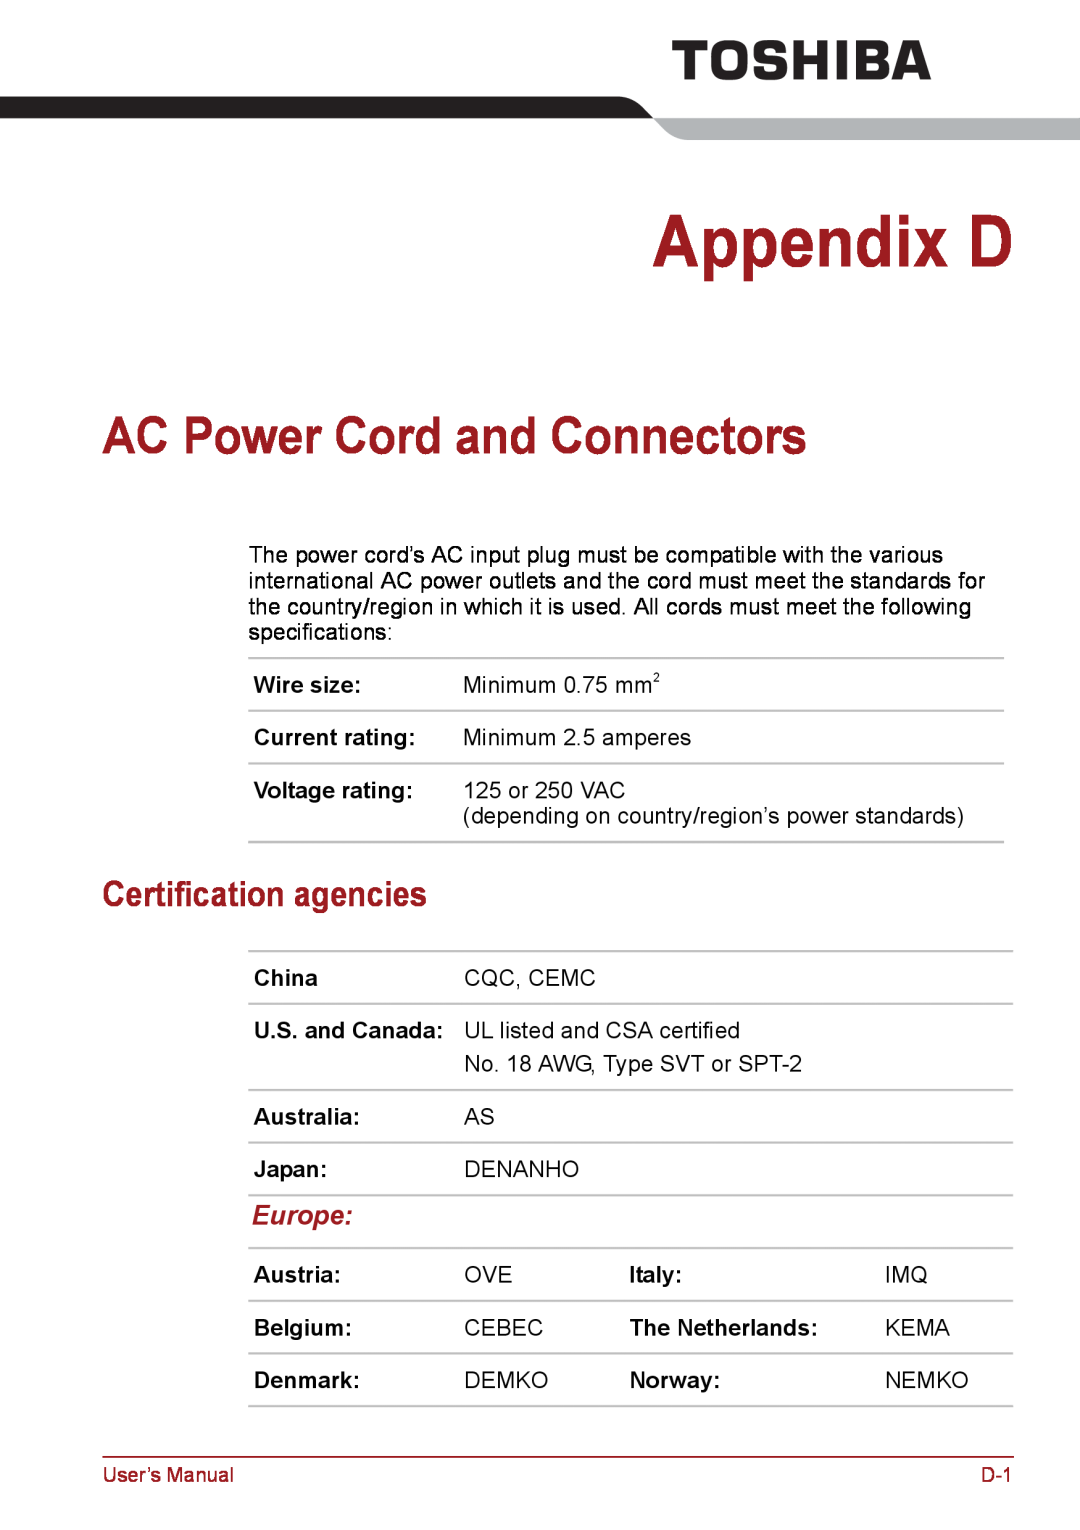 Toshiba PSC08U-02D01D Appendix D, AC Power Cord and Connectors, Wire size, Current rating, Voltage rating, U.S. and Canada 